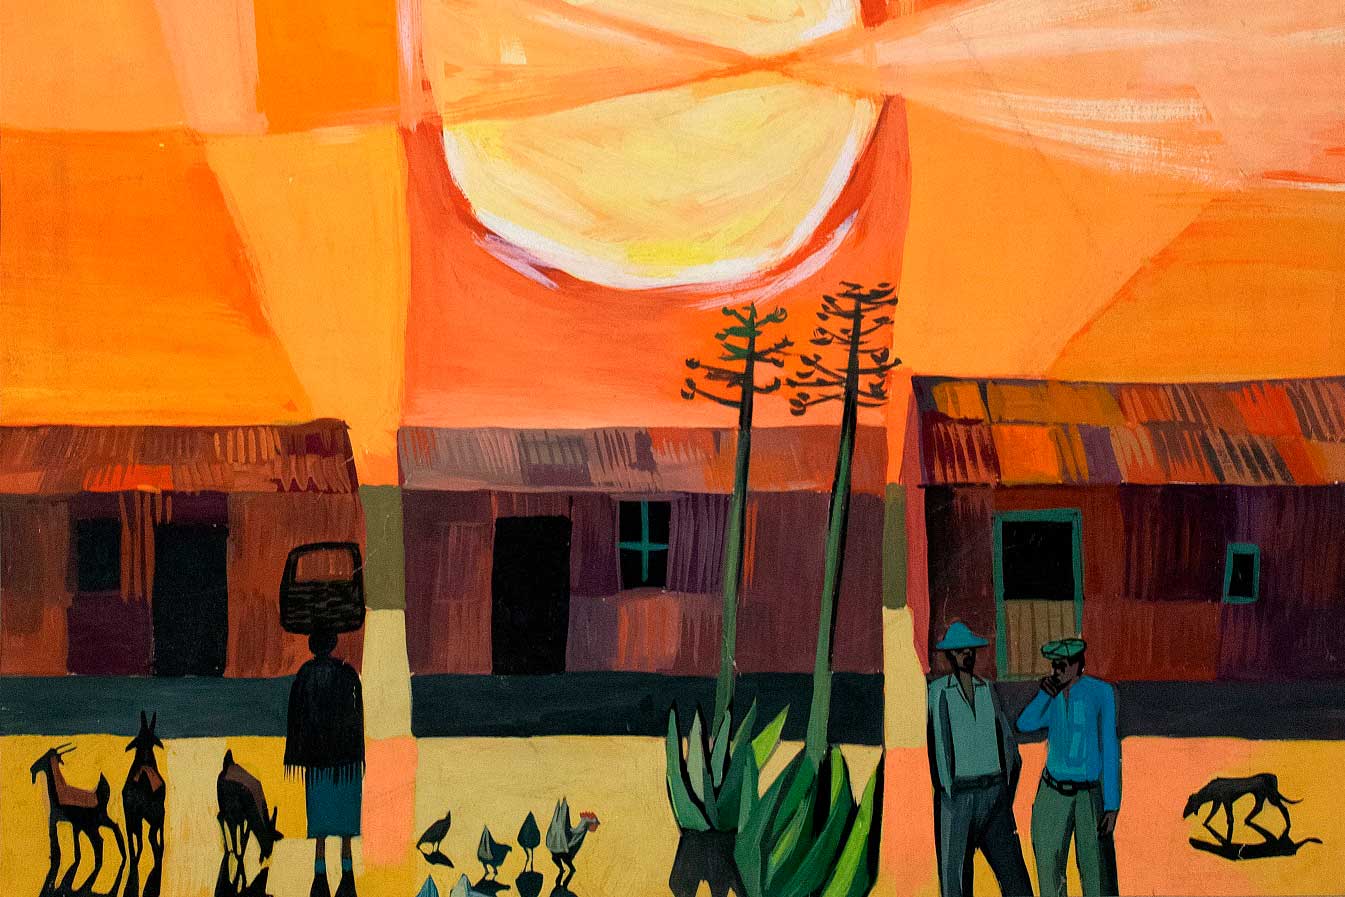 Peter Clarke (1929–2014, South Africa) That Evening Sun Goes Down, 1960 Gouache on paper 21 1/2 x 17 in. Fisk University Galleries, Nashville, Gift of the Harmon Foundation, 1991.313 © 2022 Peter Edward Clarke / DALRO, Johannesburg / Artists Rights Society (ARS), New York Courtesy American Federation of Arts Funding for the conservation of this artwork was generously provided through a grant from the Bank of America Conservation Project